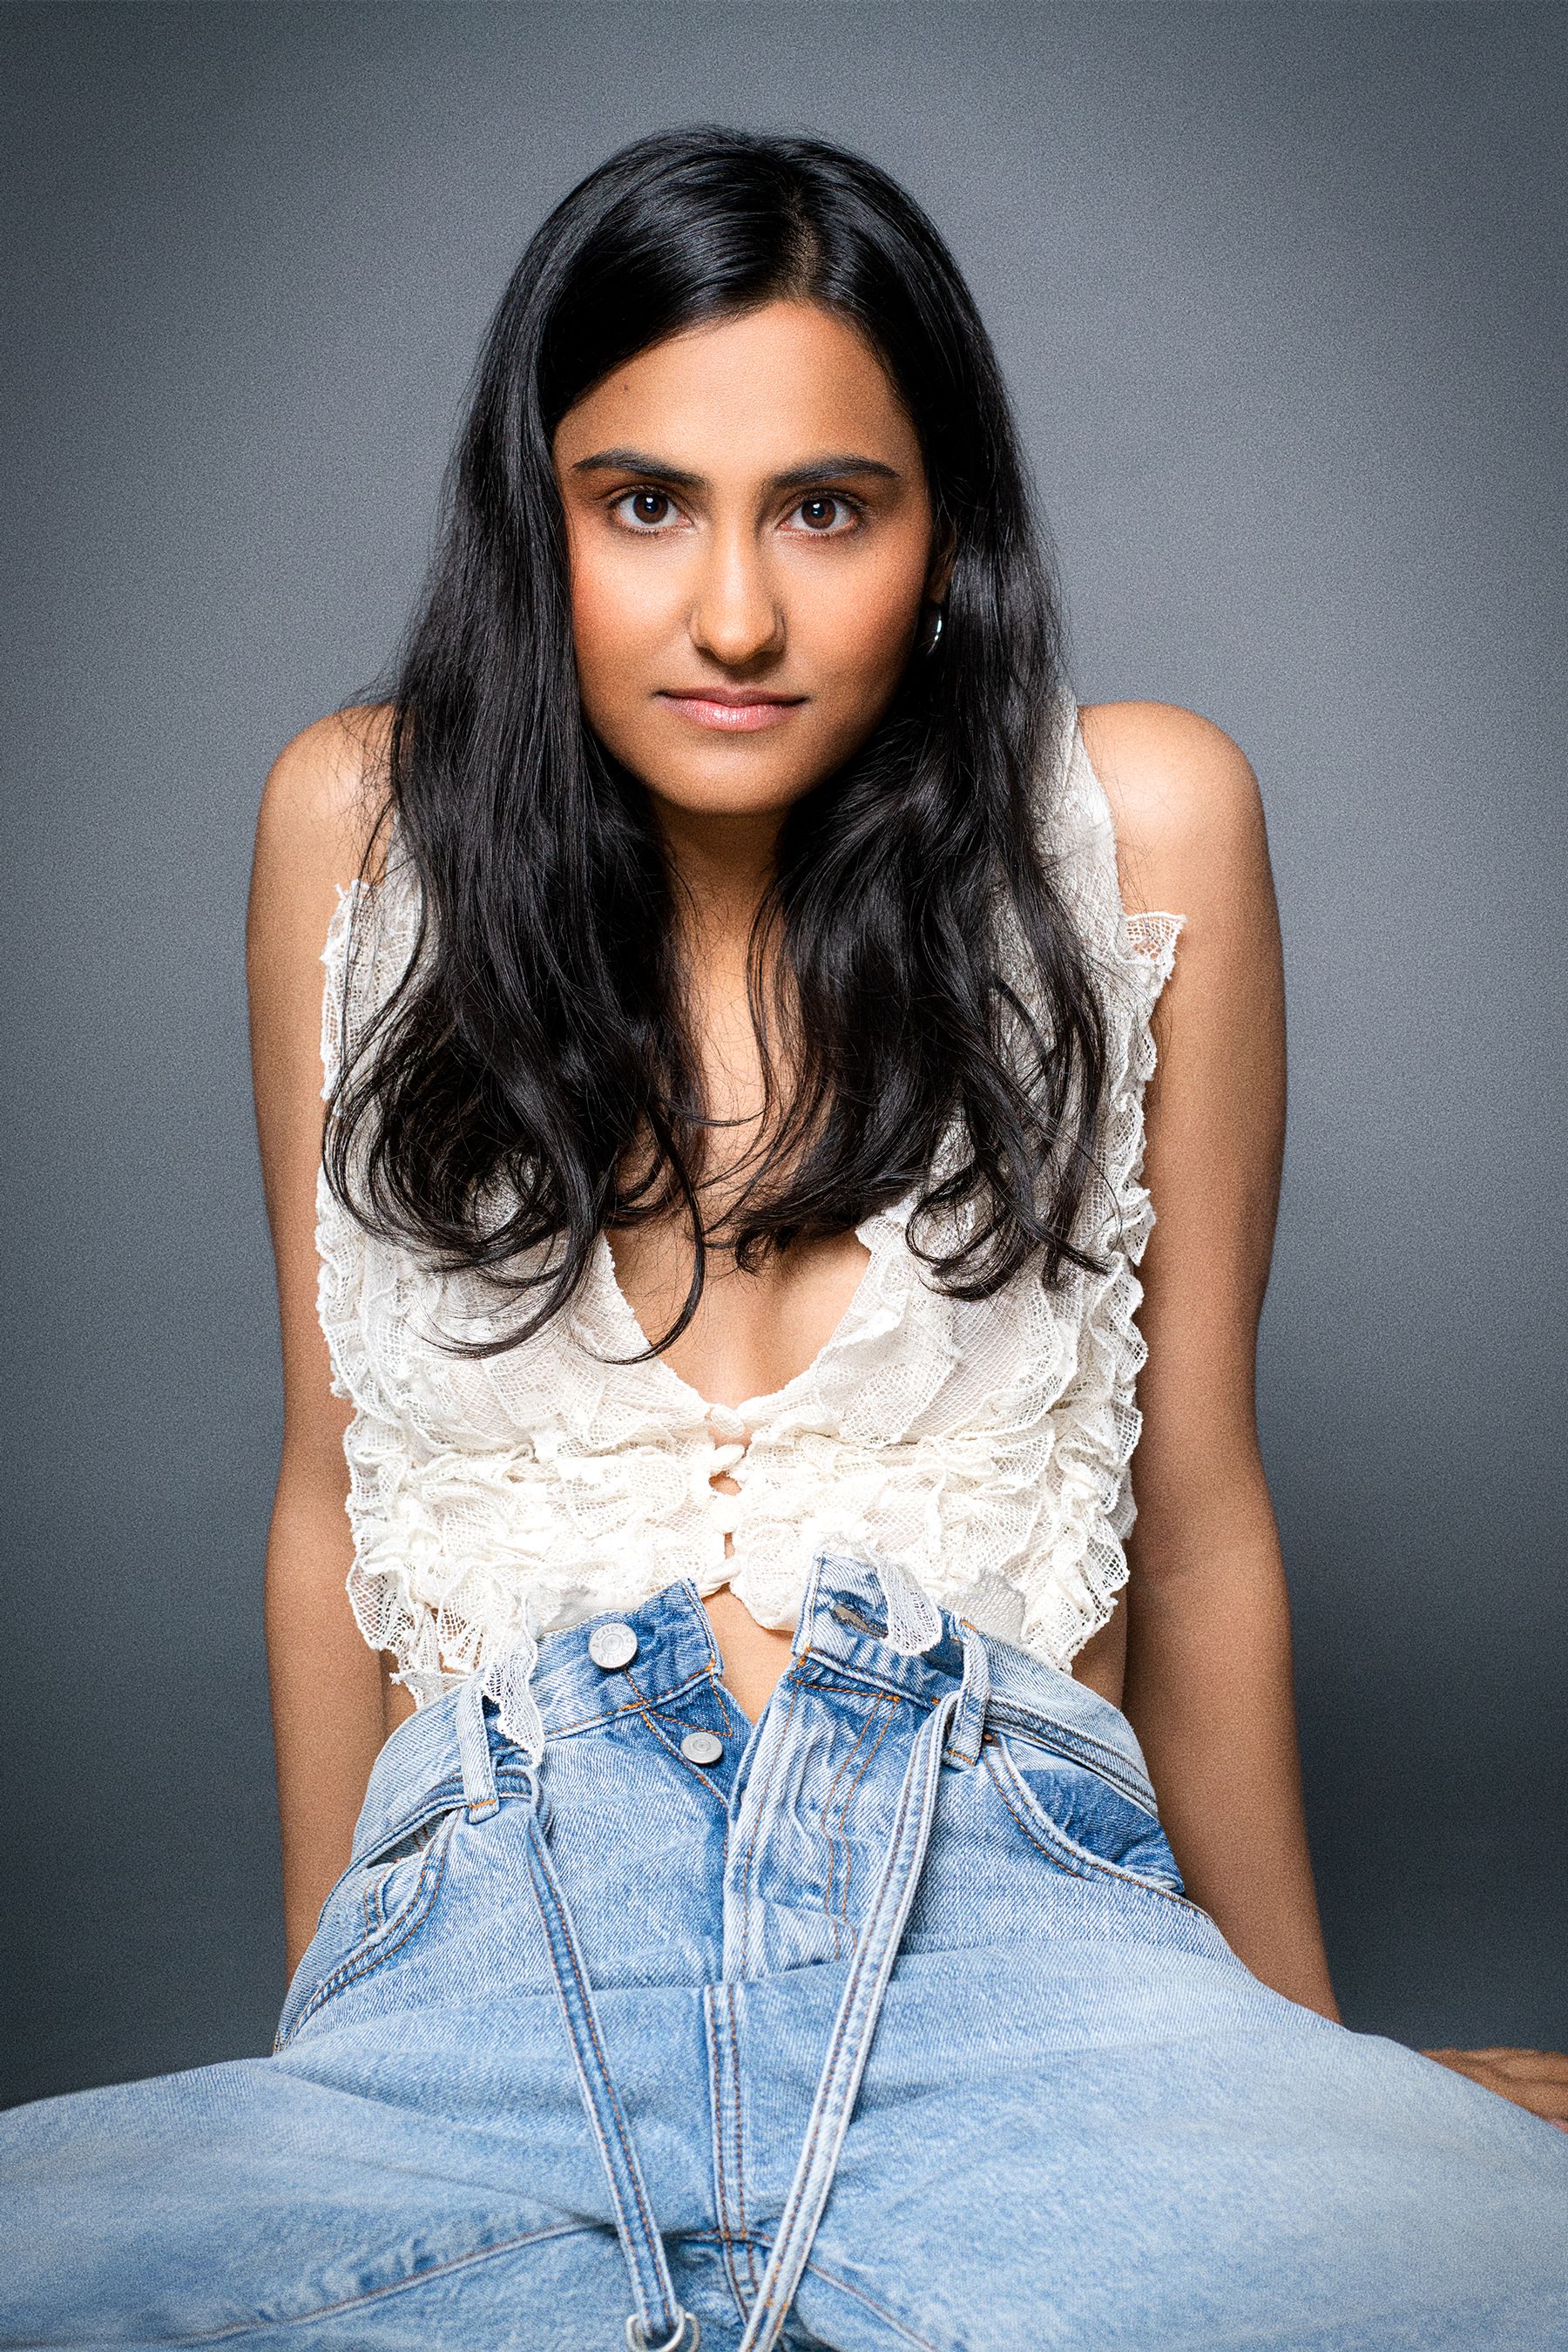 The Sex Lives of College Girls Star Amrit Kaur Talks Defying Stereotypes pic